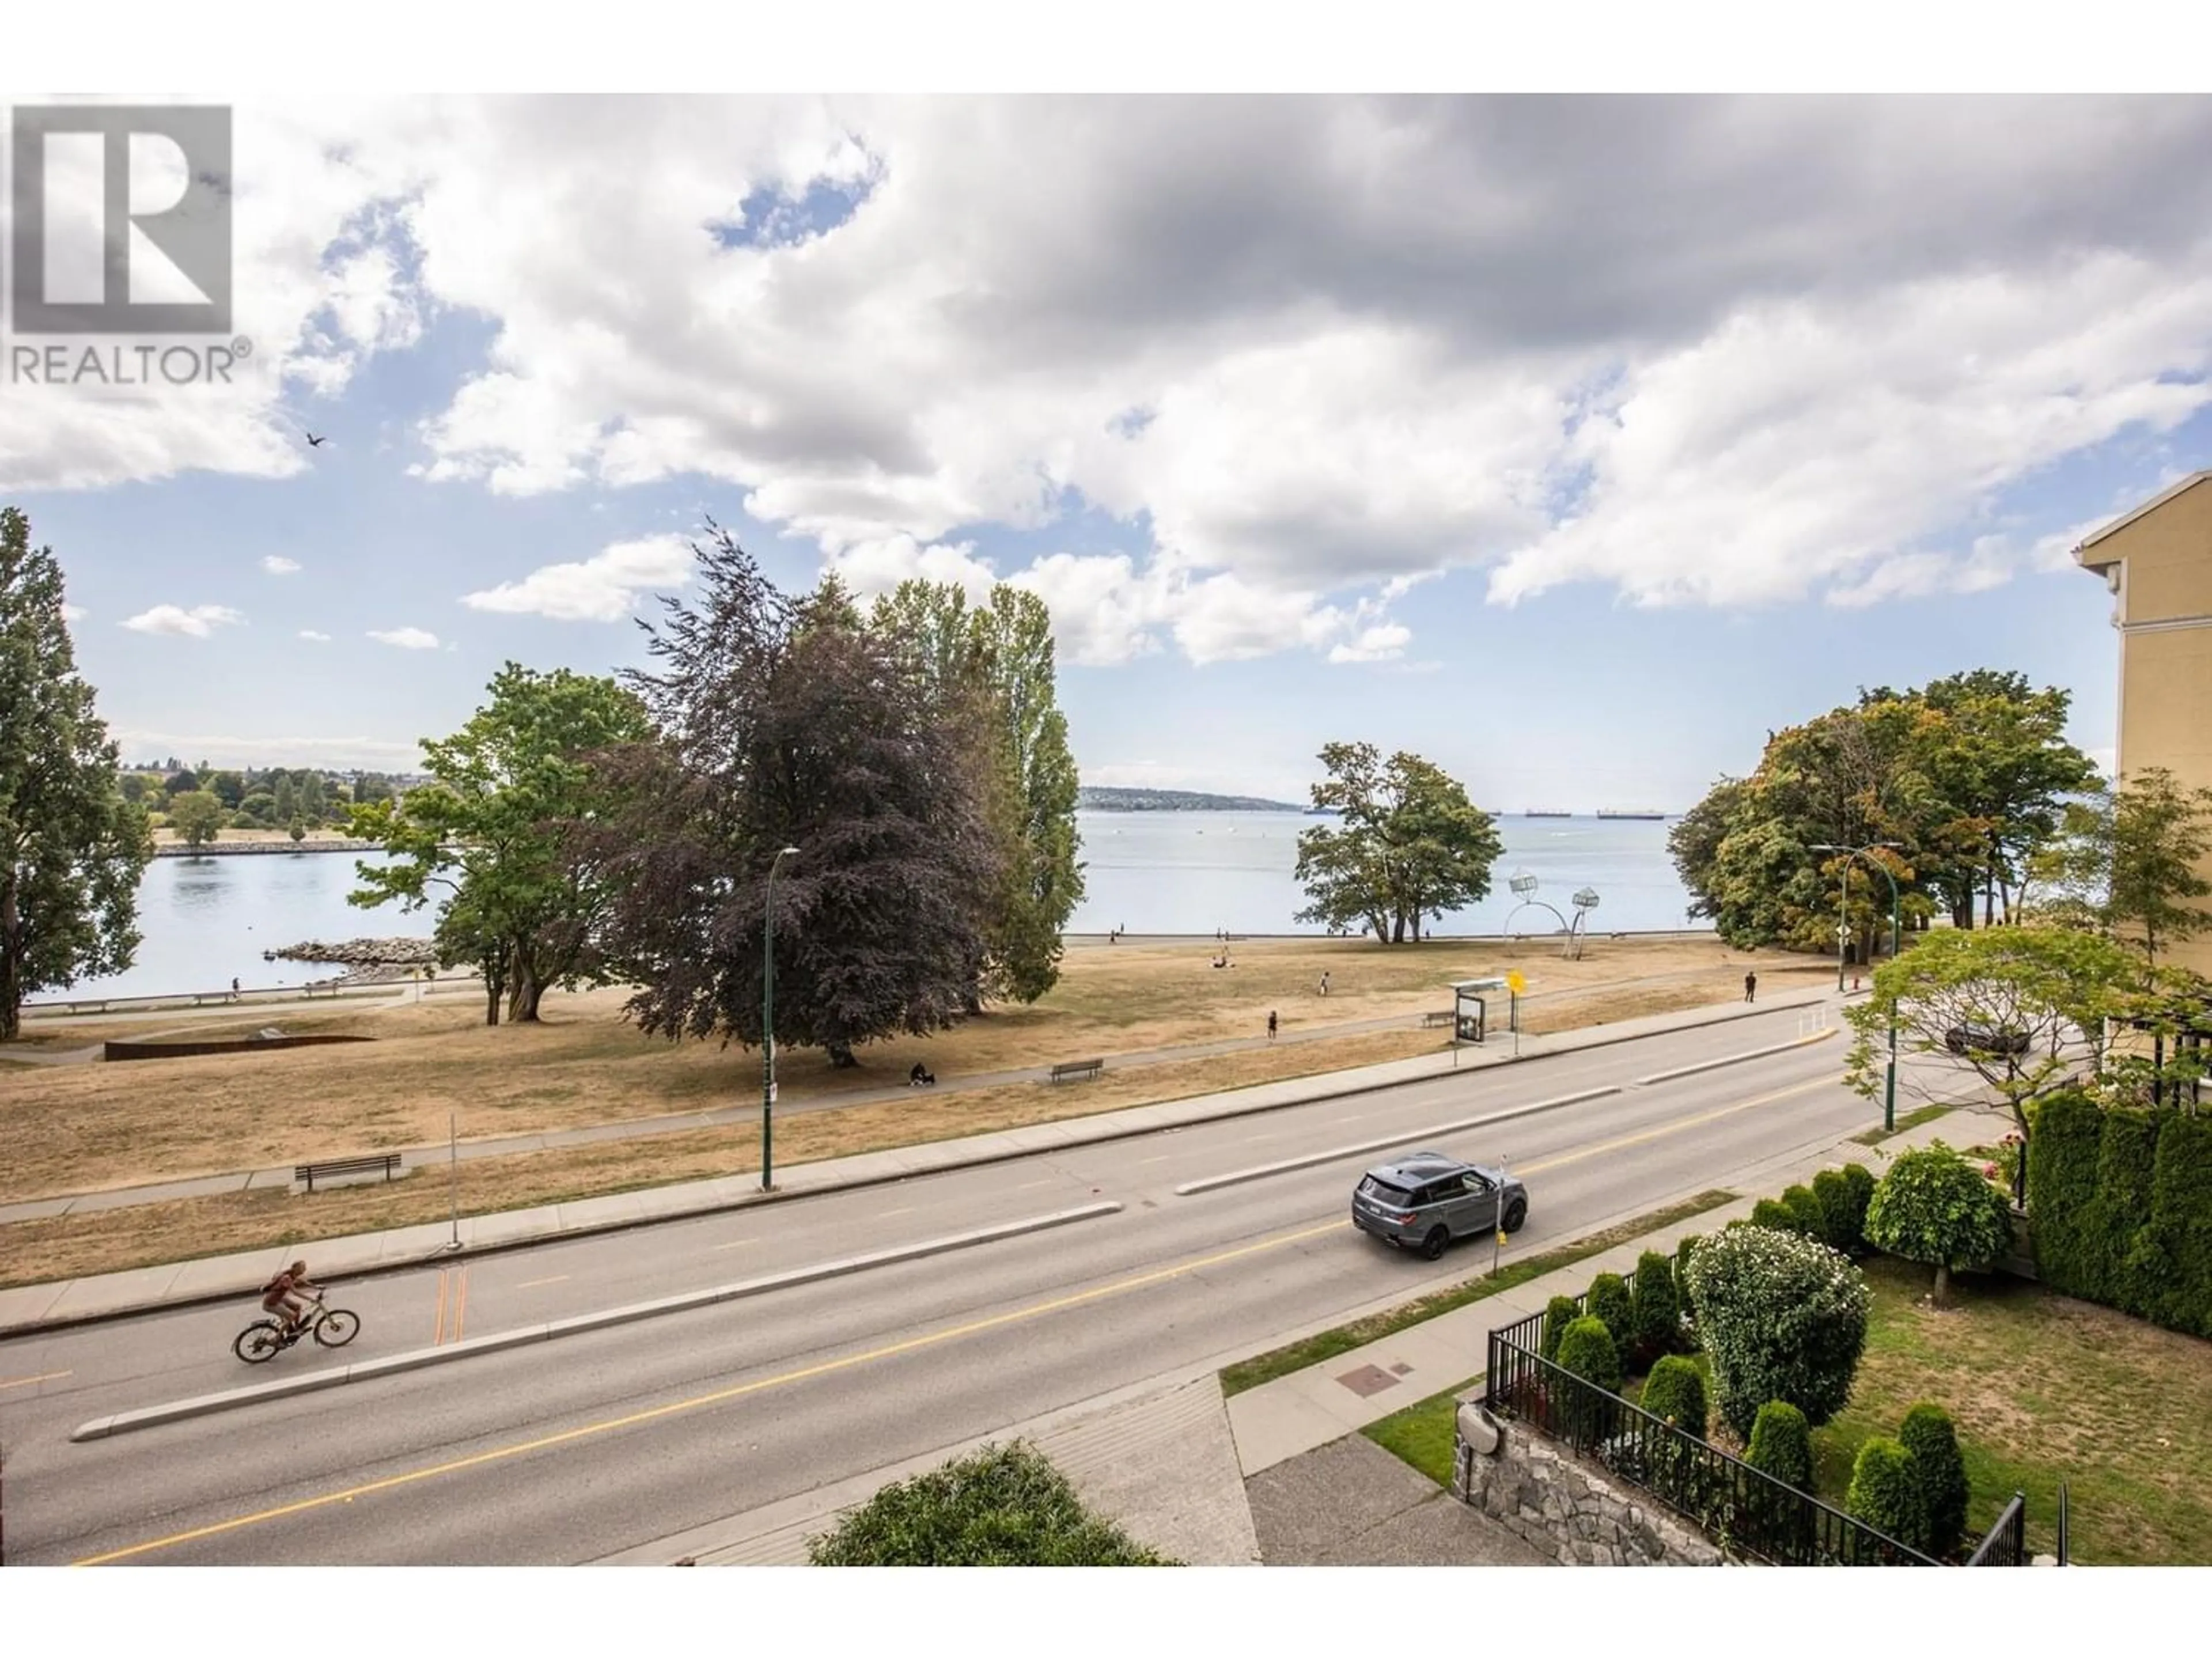 Lakeview for 402 1419 BEACH AVENUE, Vancouver British Columbia V6G1Y3